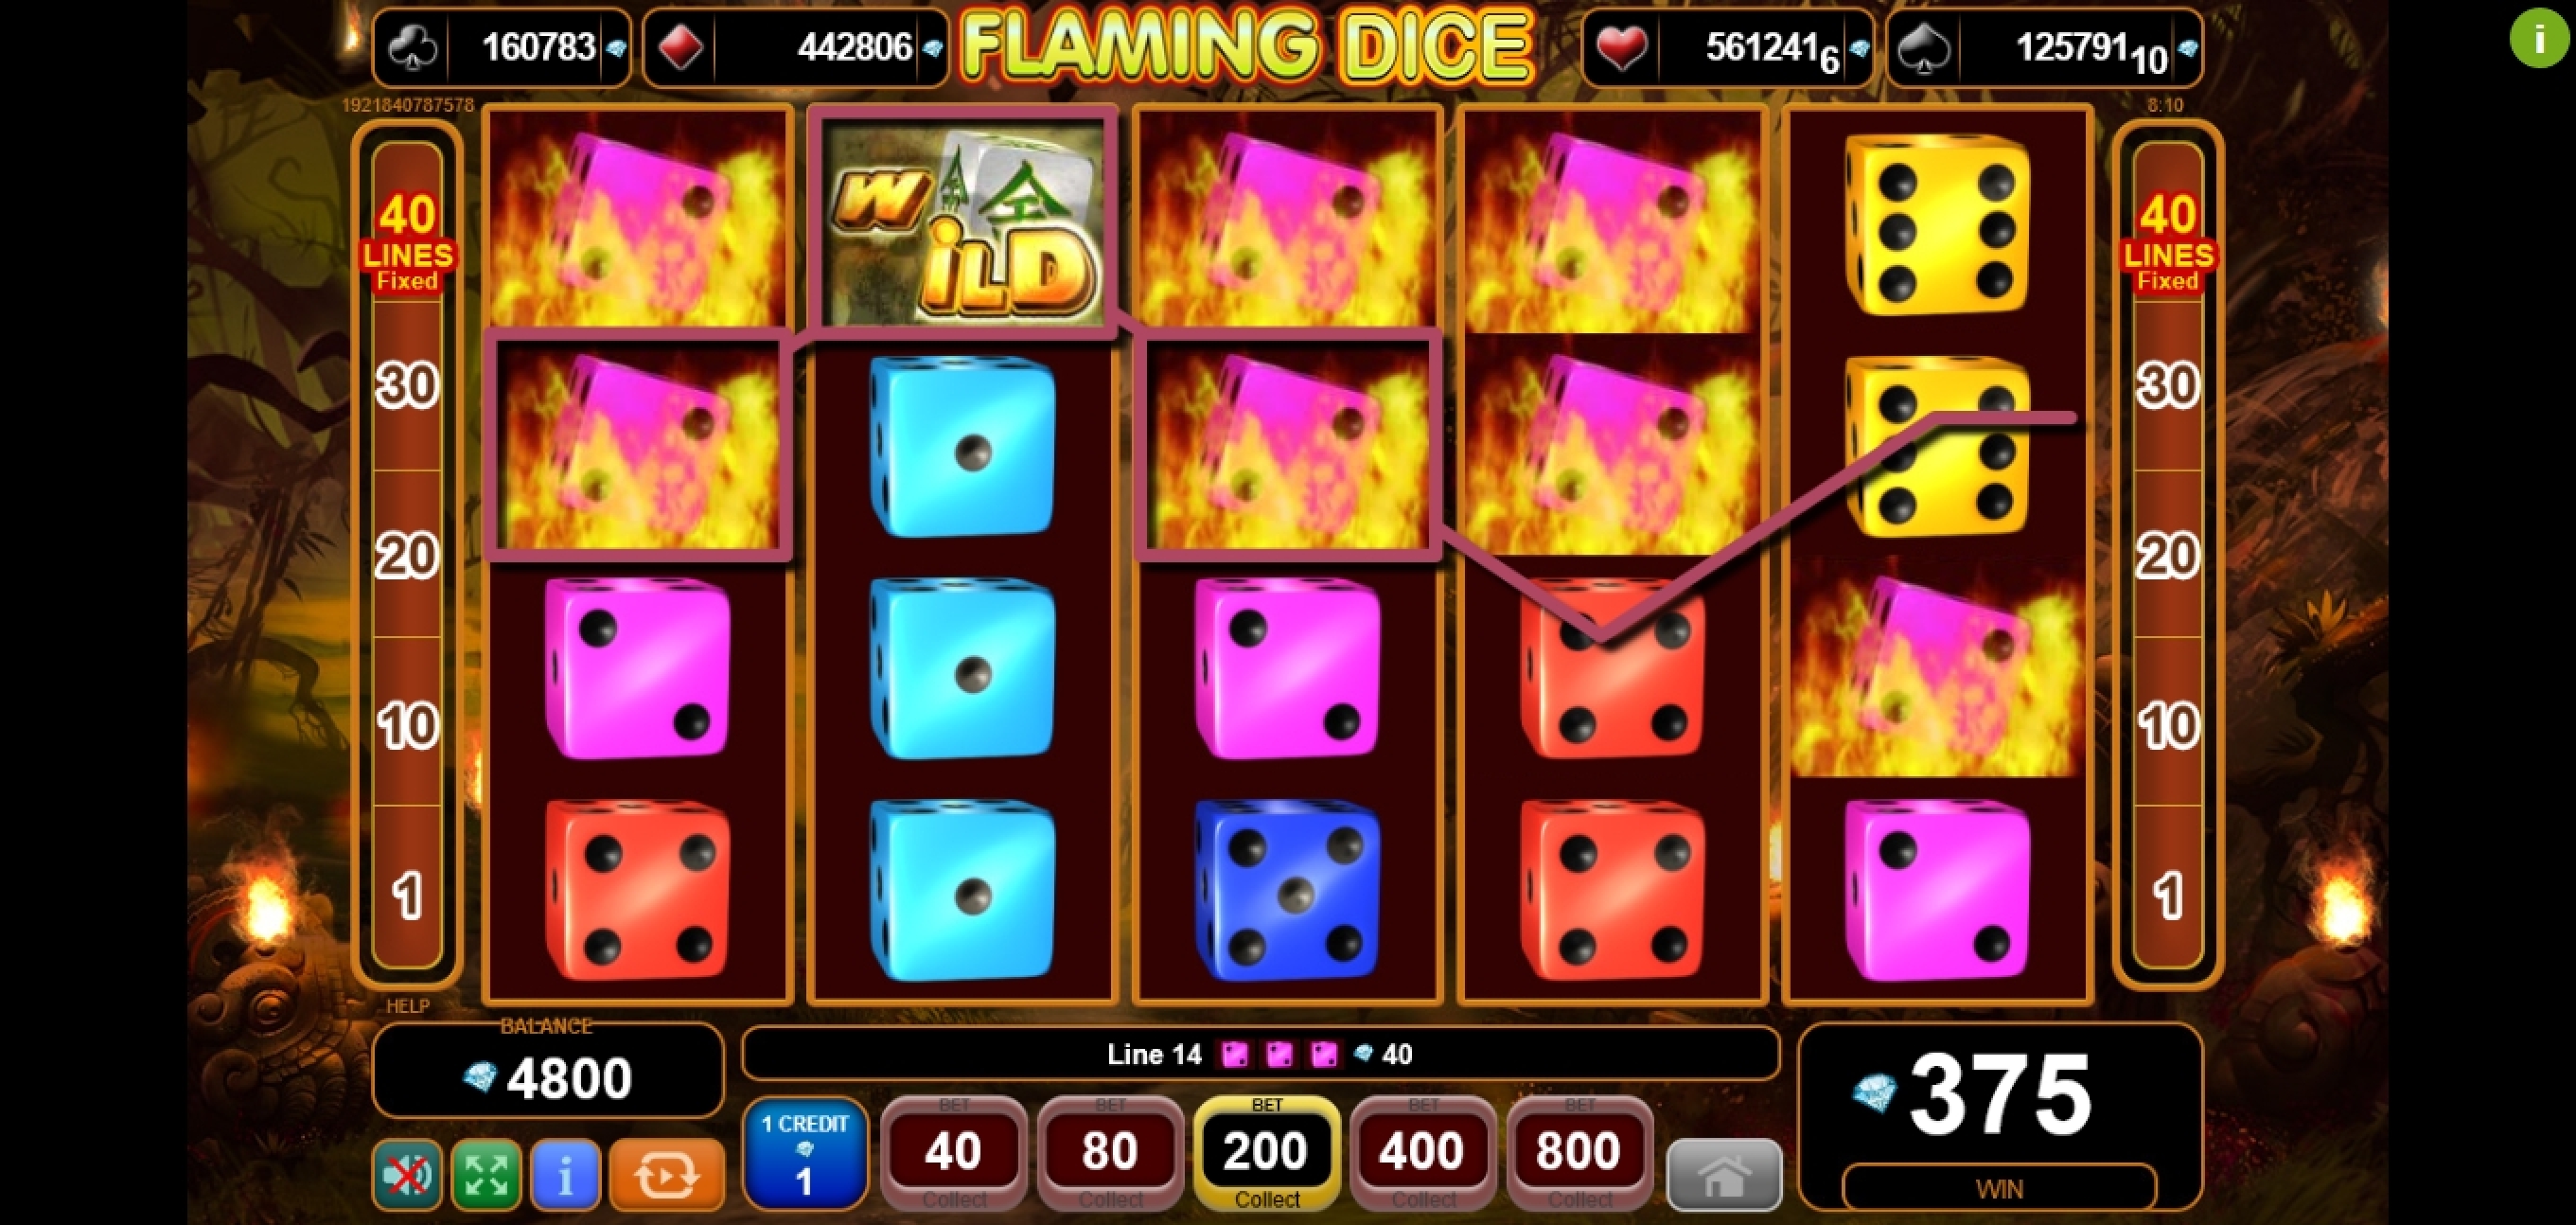 Win Money in Flaming Dice Free Slot Game by EGT